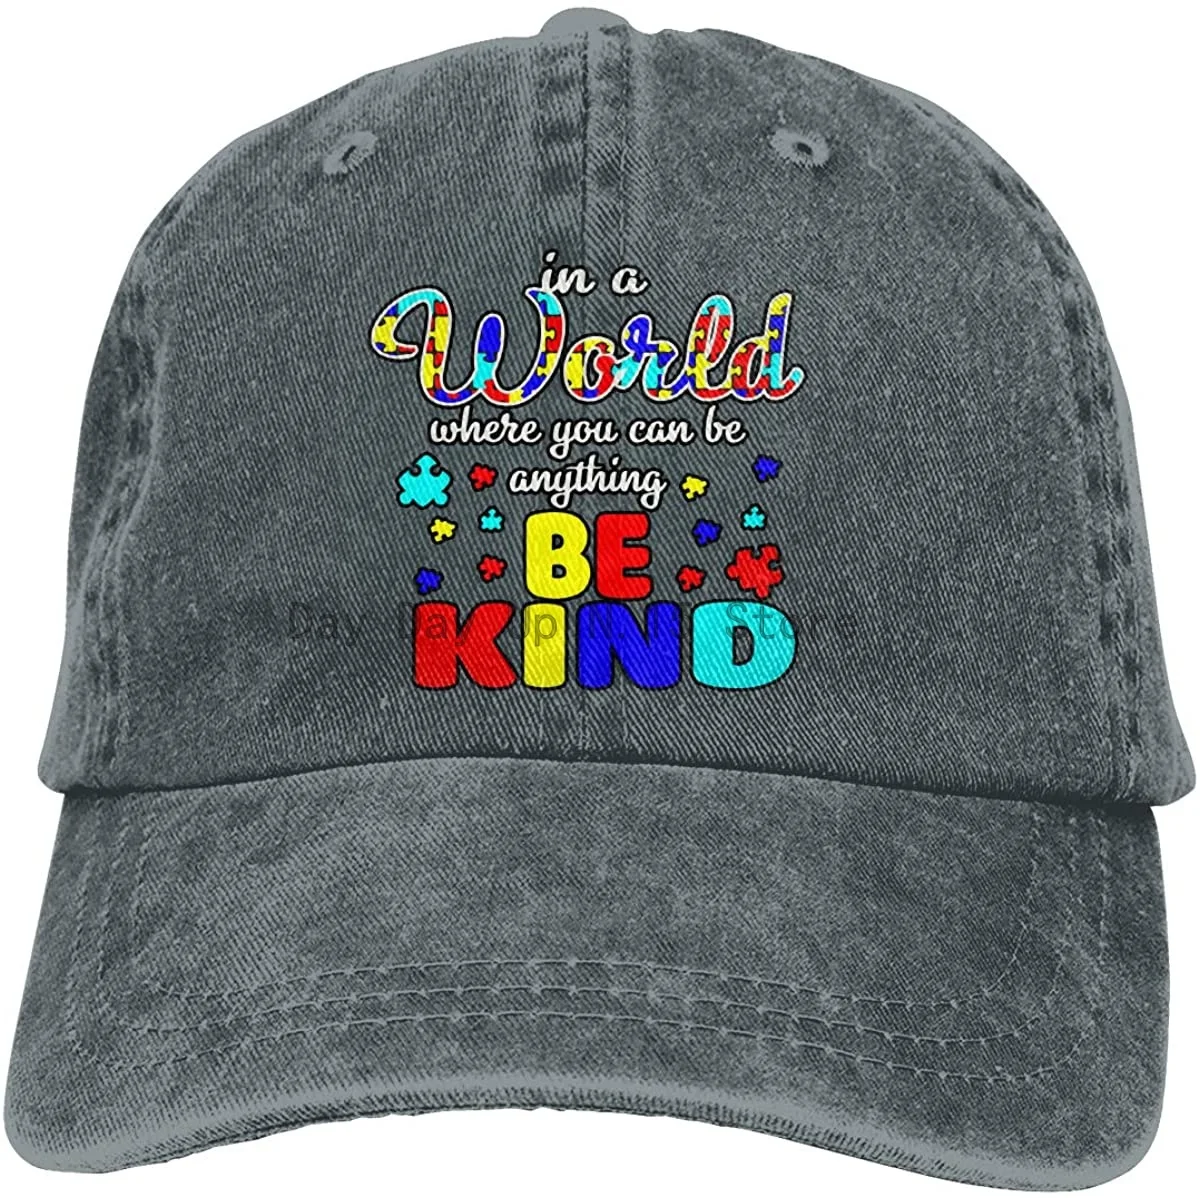 

Retro Men'S In A World Where You Can Be Kind Autism Washed Denim Baseball Caps Adjustable Snapback Cap